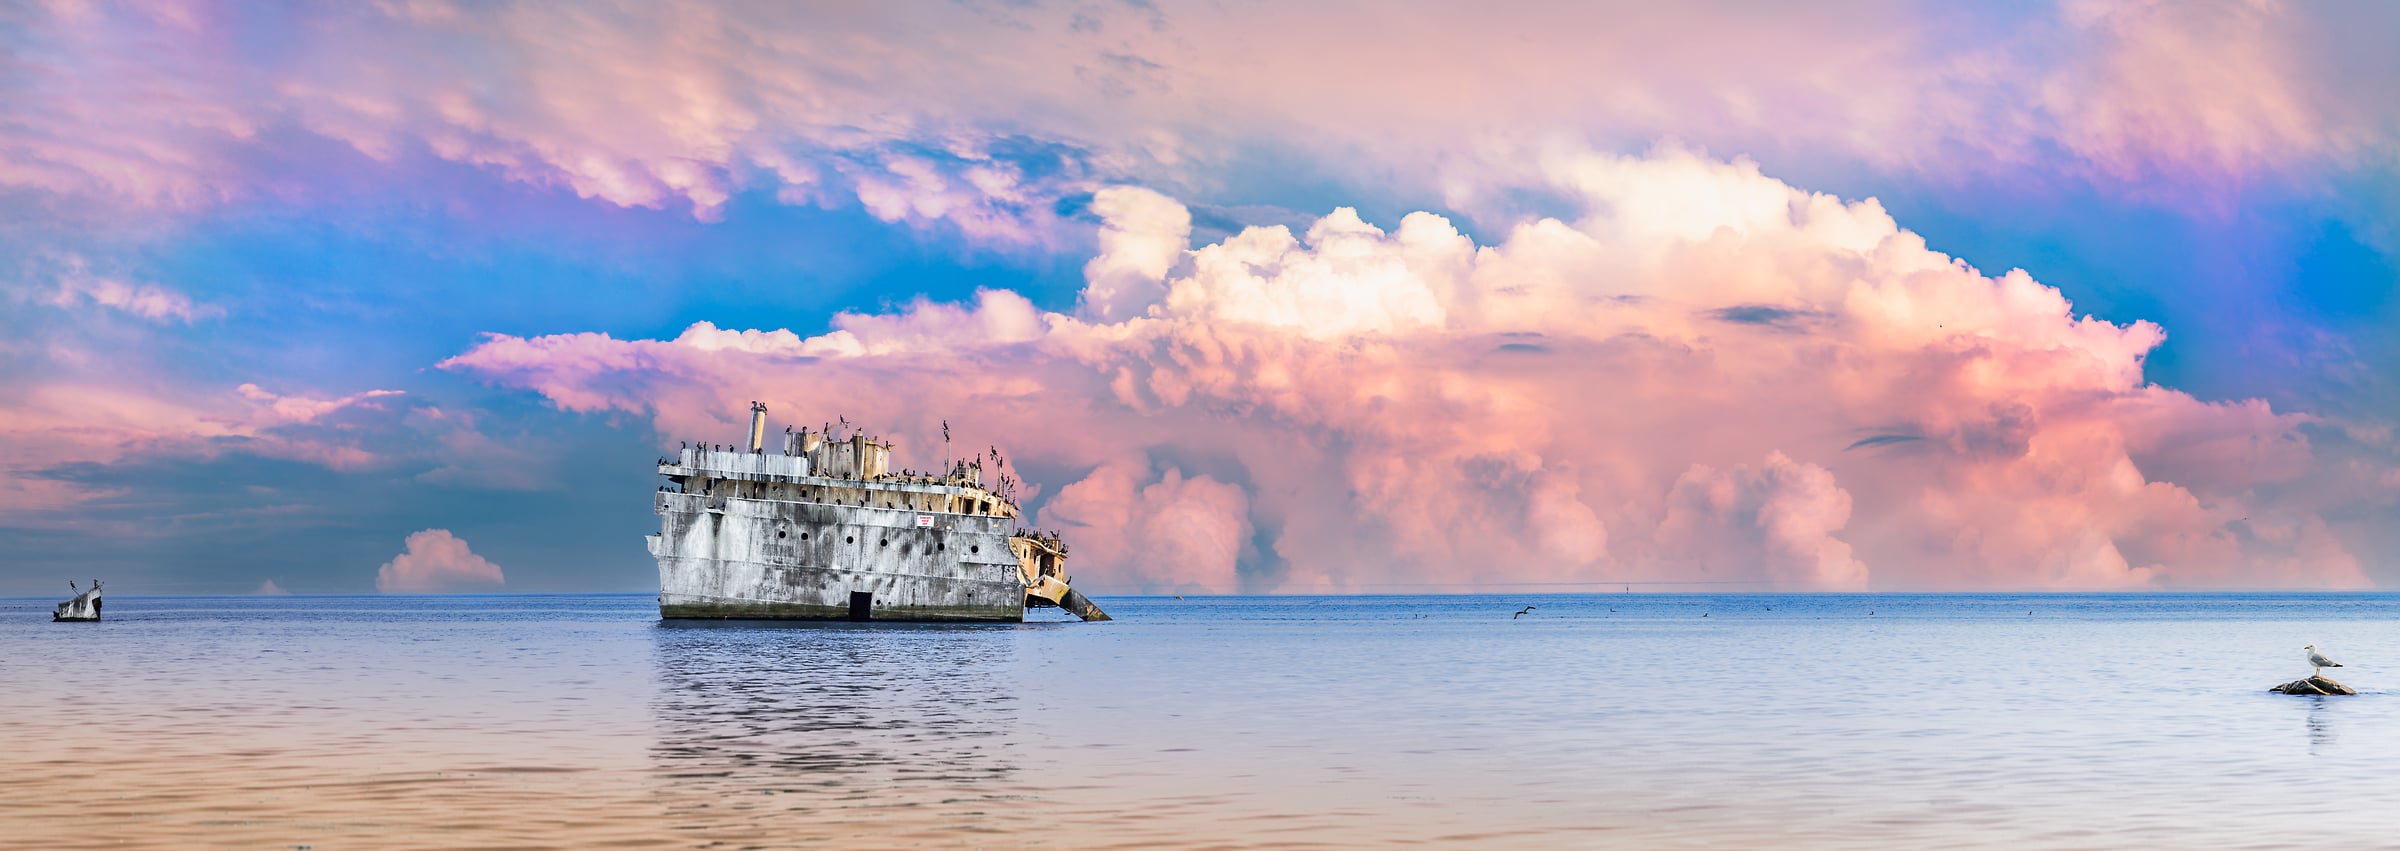 276 megapixels! A very high resolution, large-format VAST photo print of a shipwreck in Lake Michigan; wall mural photograph created by David David at the Wreck Of The Francisco Morazan, South Manitou Island, Lake Michigan, Michigan.